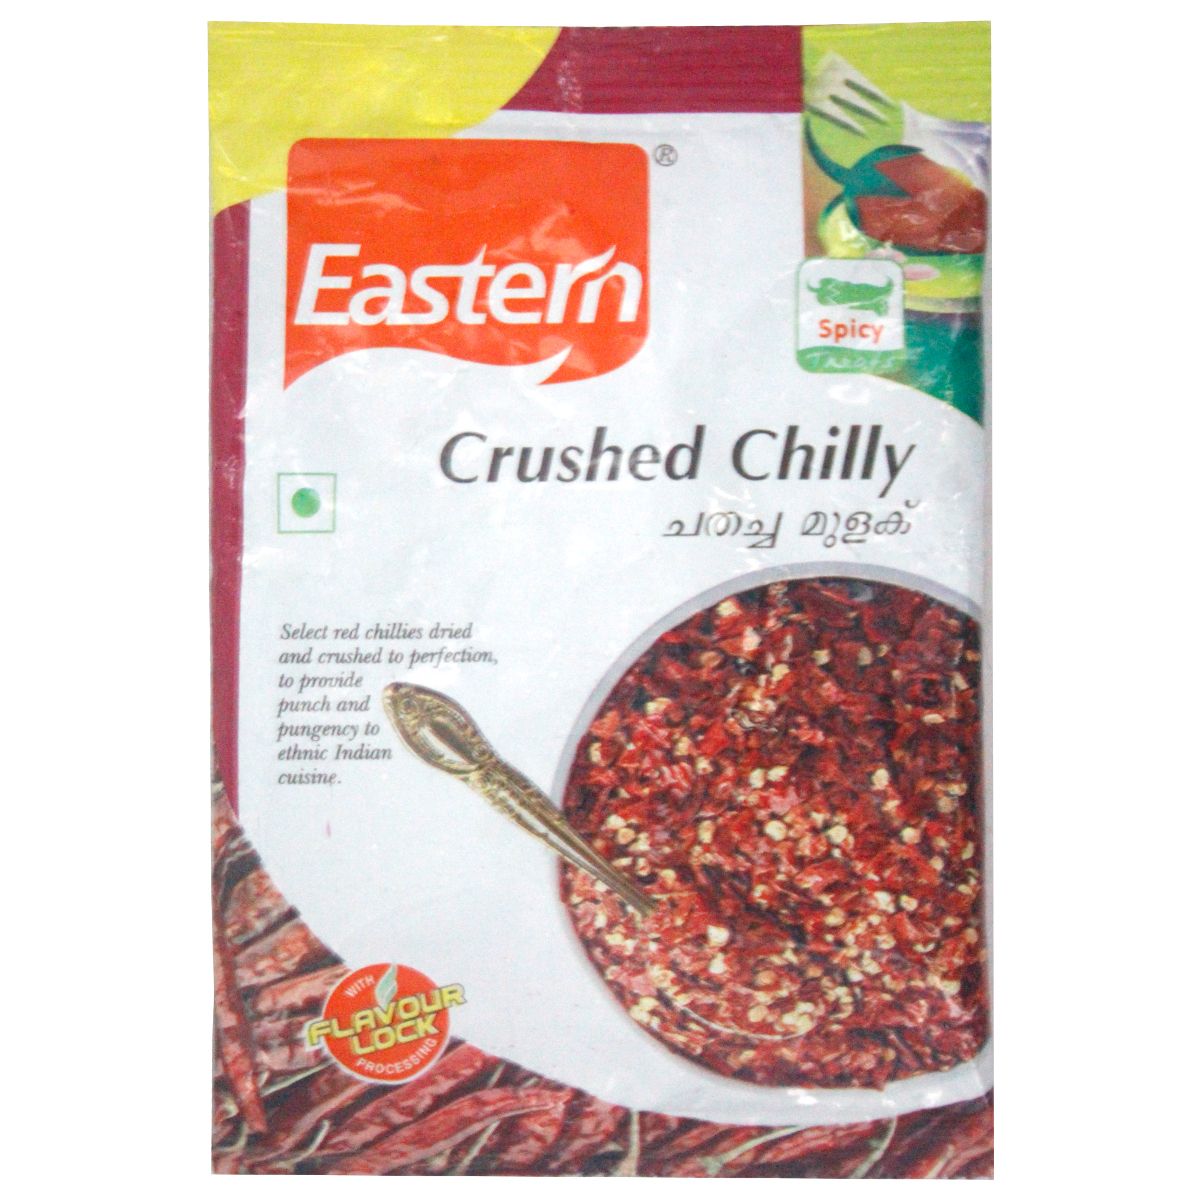 Eastern Crushed Chilly 20g